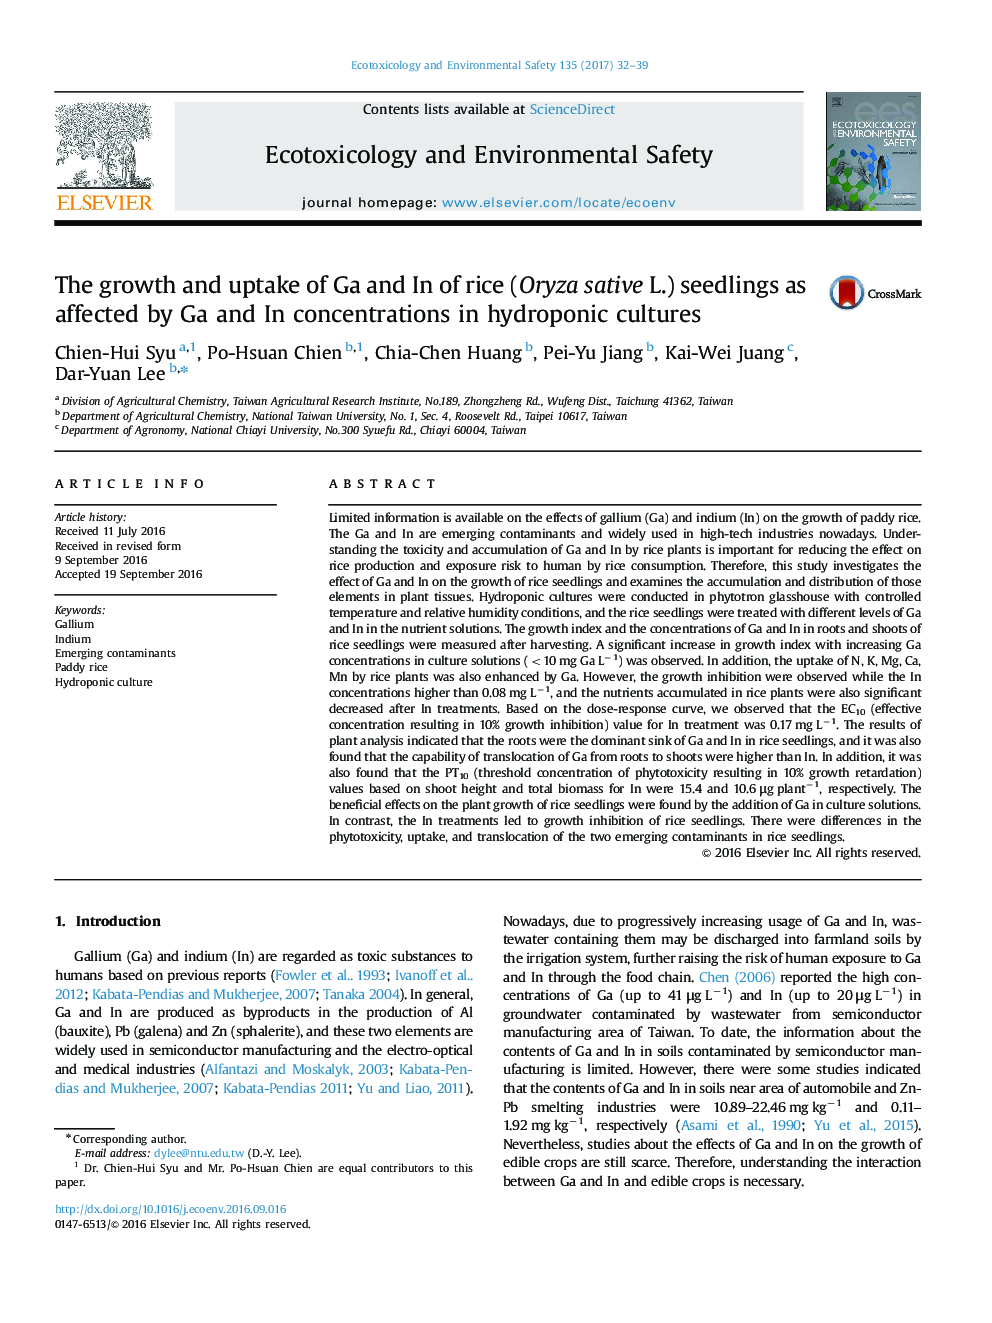 The growth and uptake of Ga and In of rice (Oryza sative L.) seedlings as affected by Ga and In concentrations in hydroponic cultures